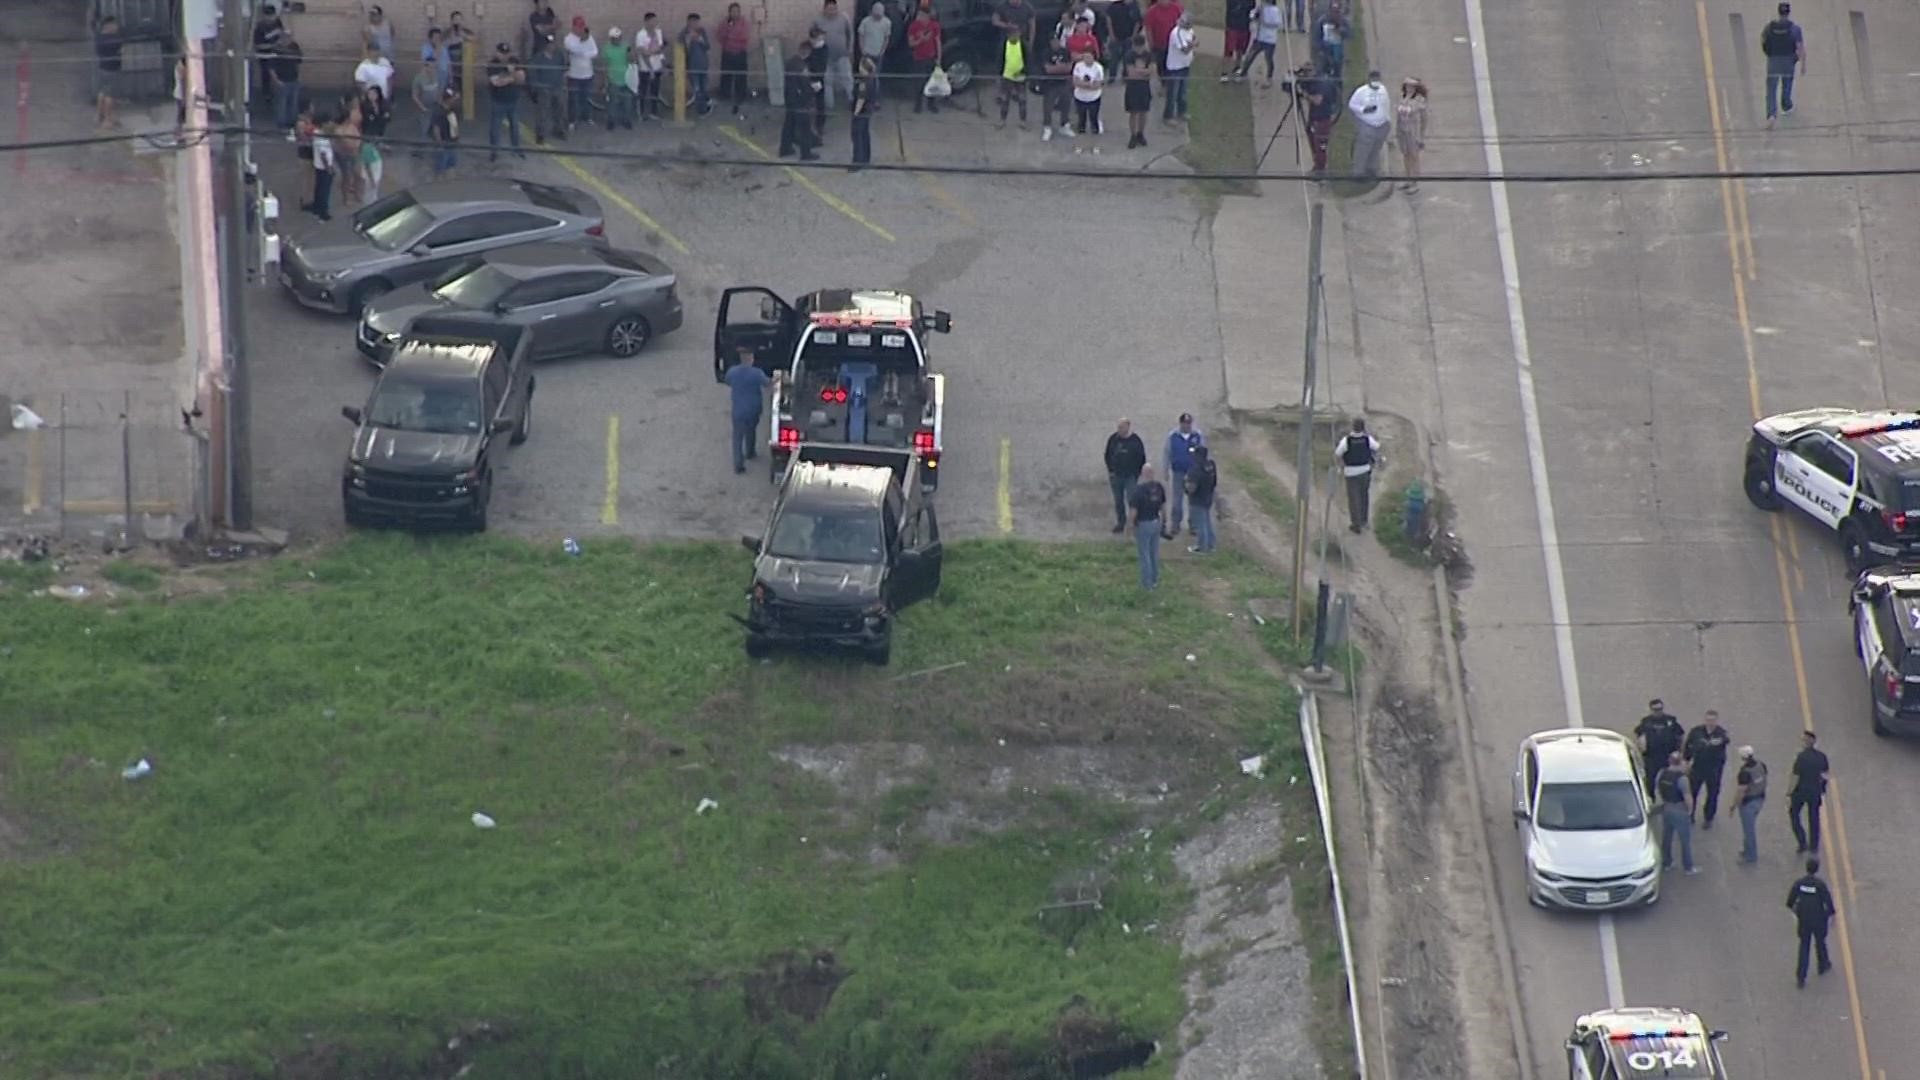 Police said a chase started in west Houston and ended when the driver crashed into a bayou in the Sharpstown area.